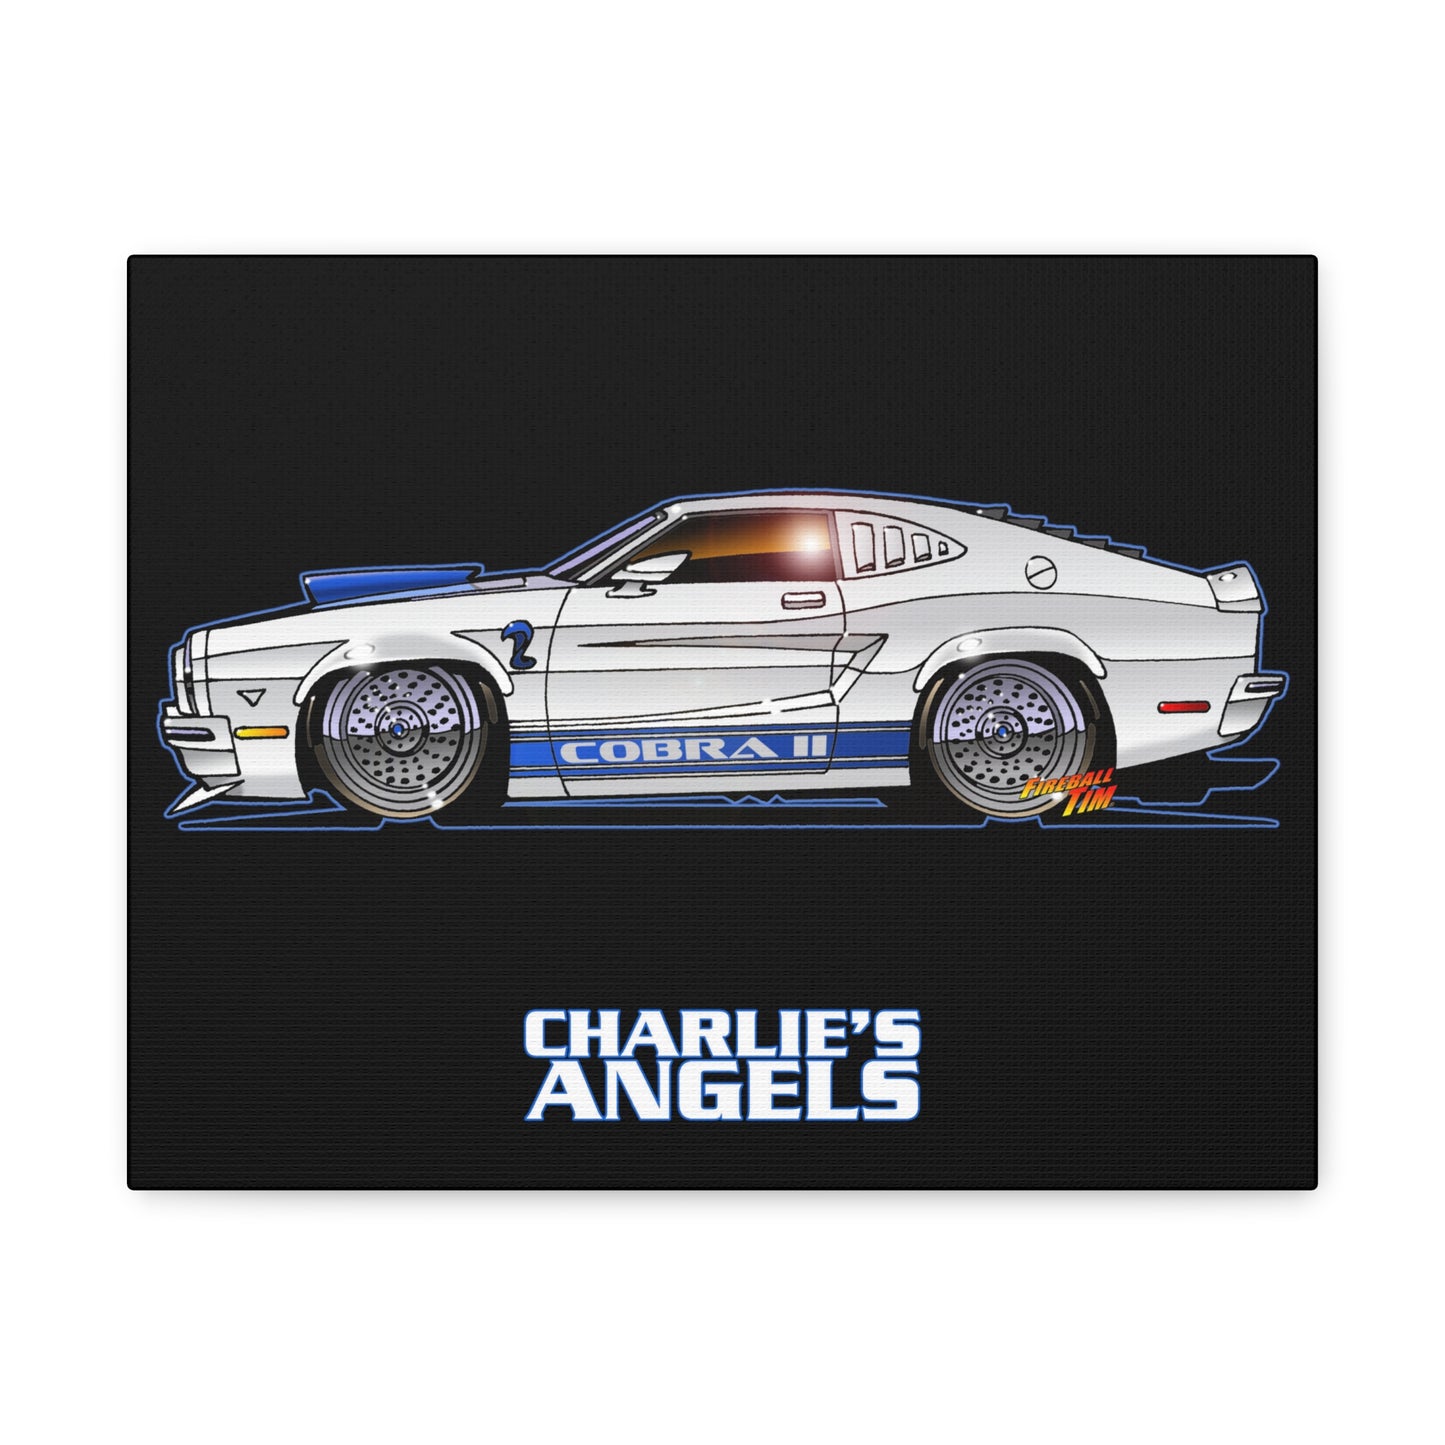 CHARLIES ANGELS TV Show Ford Mustang Cobra 2 Canvas Gallery Art Print 11x14